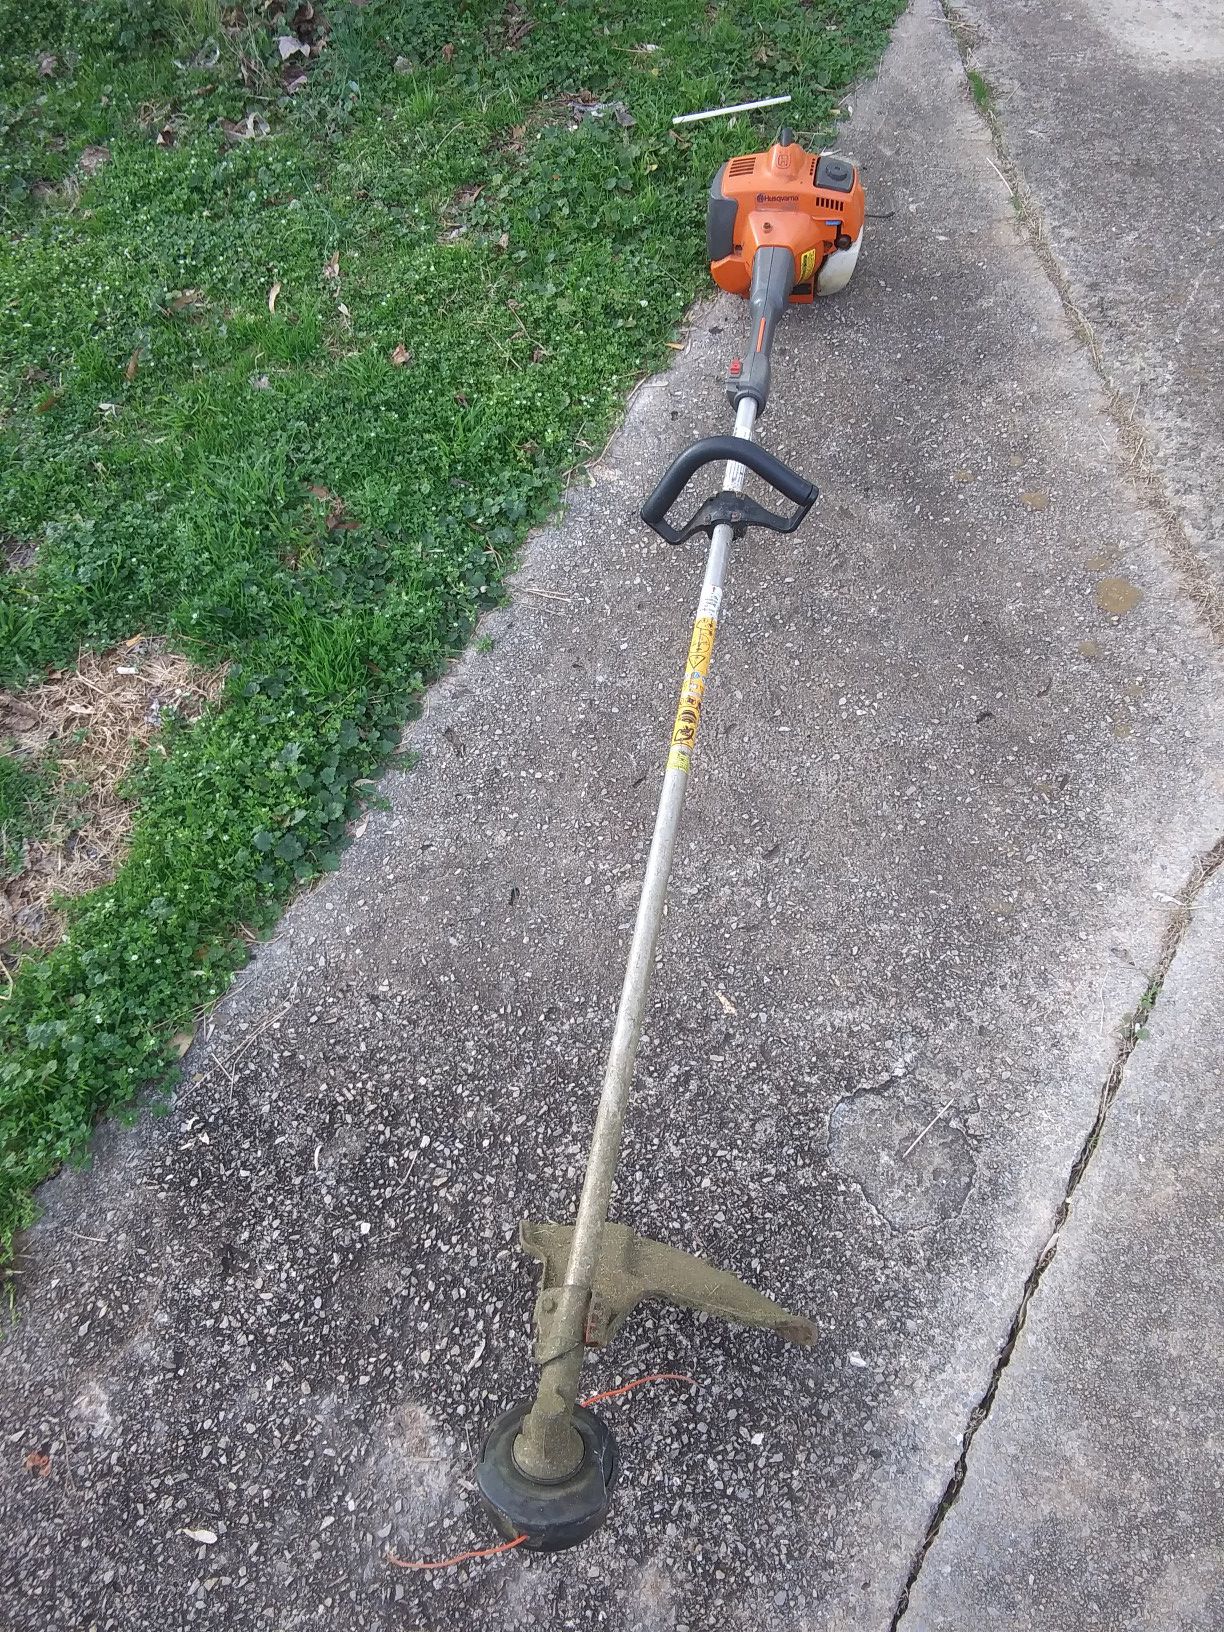 Husqvarna 223l Straight Shaft Weed Eater For Sale In Aragon Ga Offerup